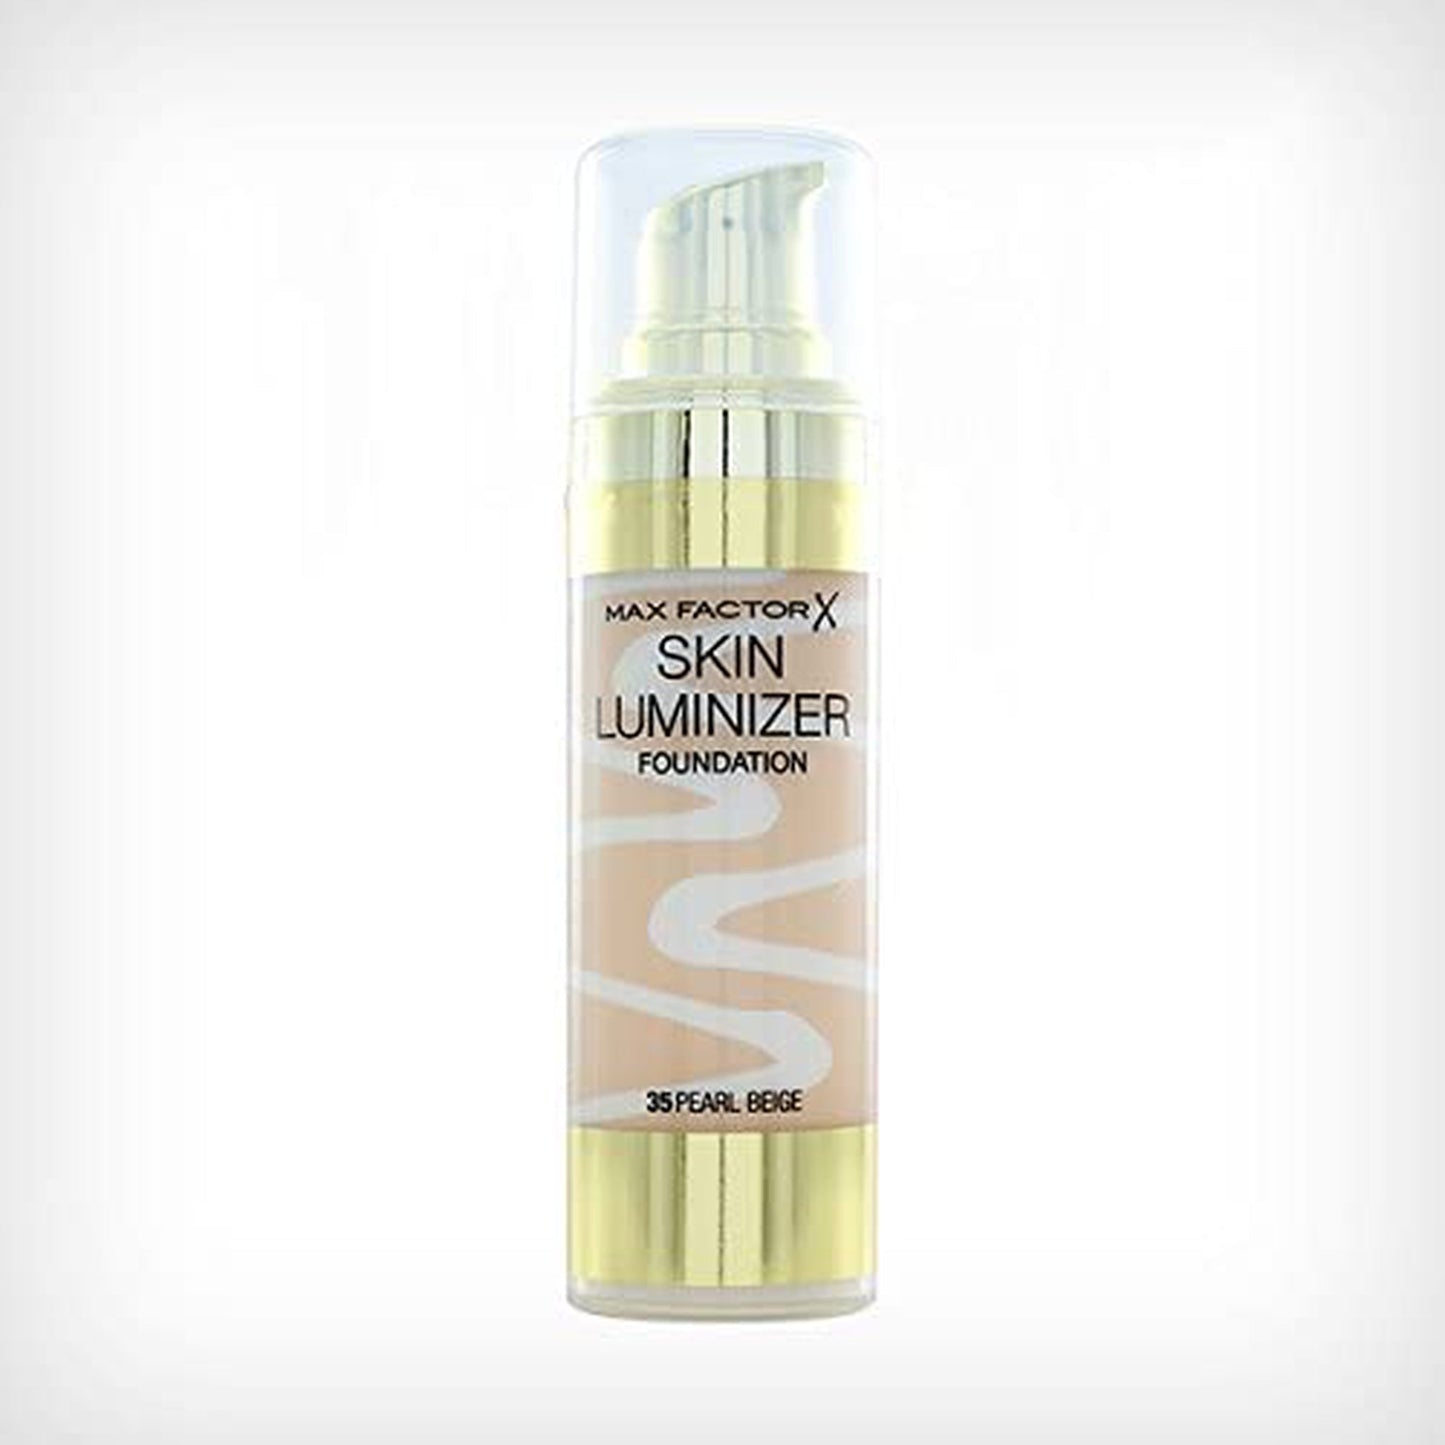 Max Factor Skin Luminizer Foundation - 35 Pearl Beige-Max Factor-BeautyNmakeup.co.uk